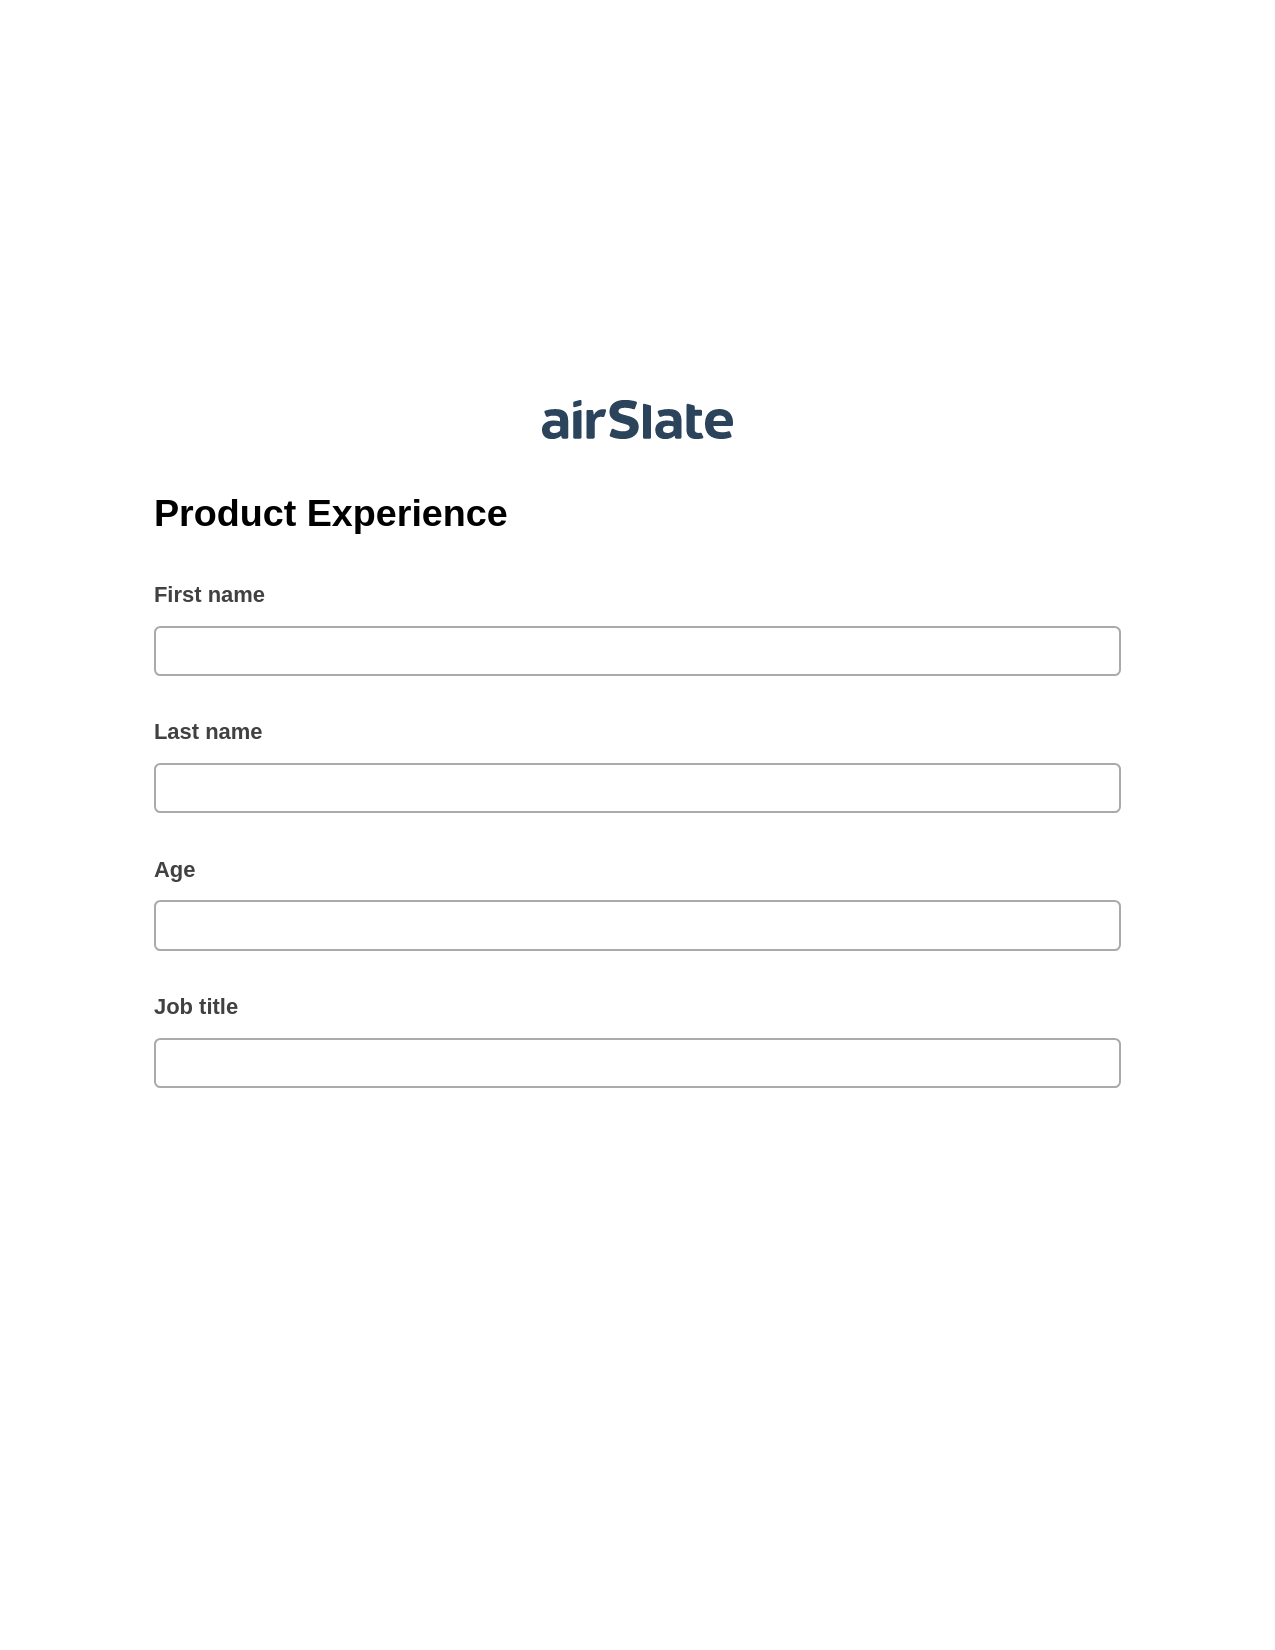 Product Experience Pre-fill from Salesforce Records with SOQL Bot, Send Mailchimp Campaign Bot, Archive to Google Drive Bot